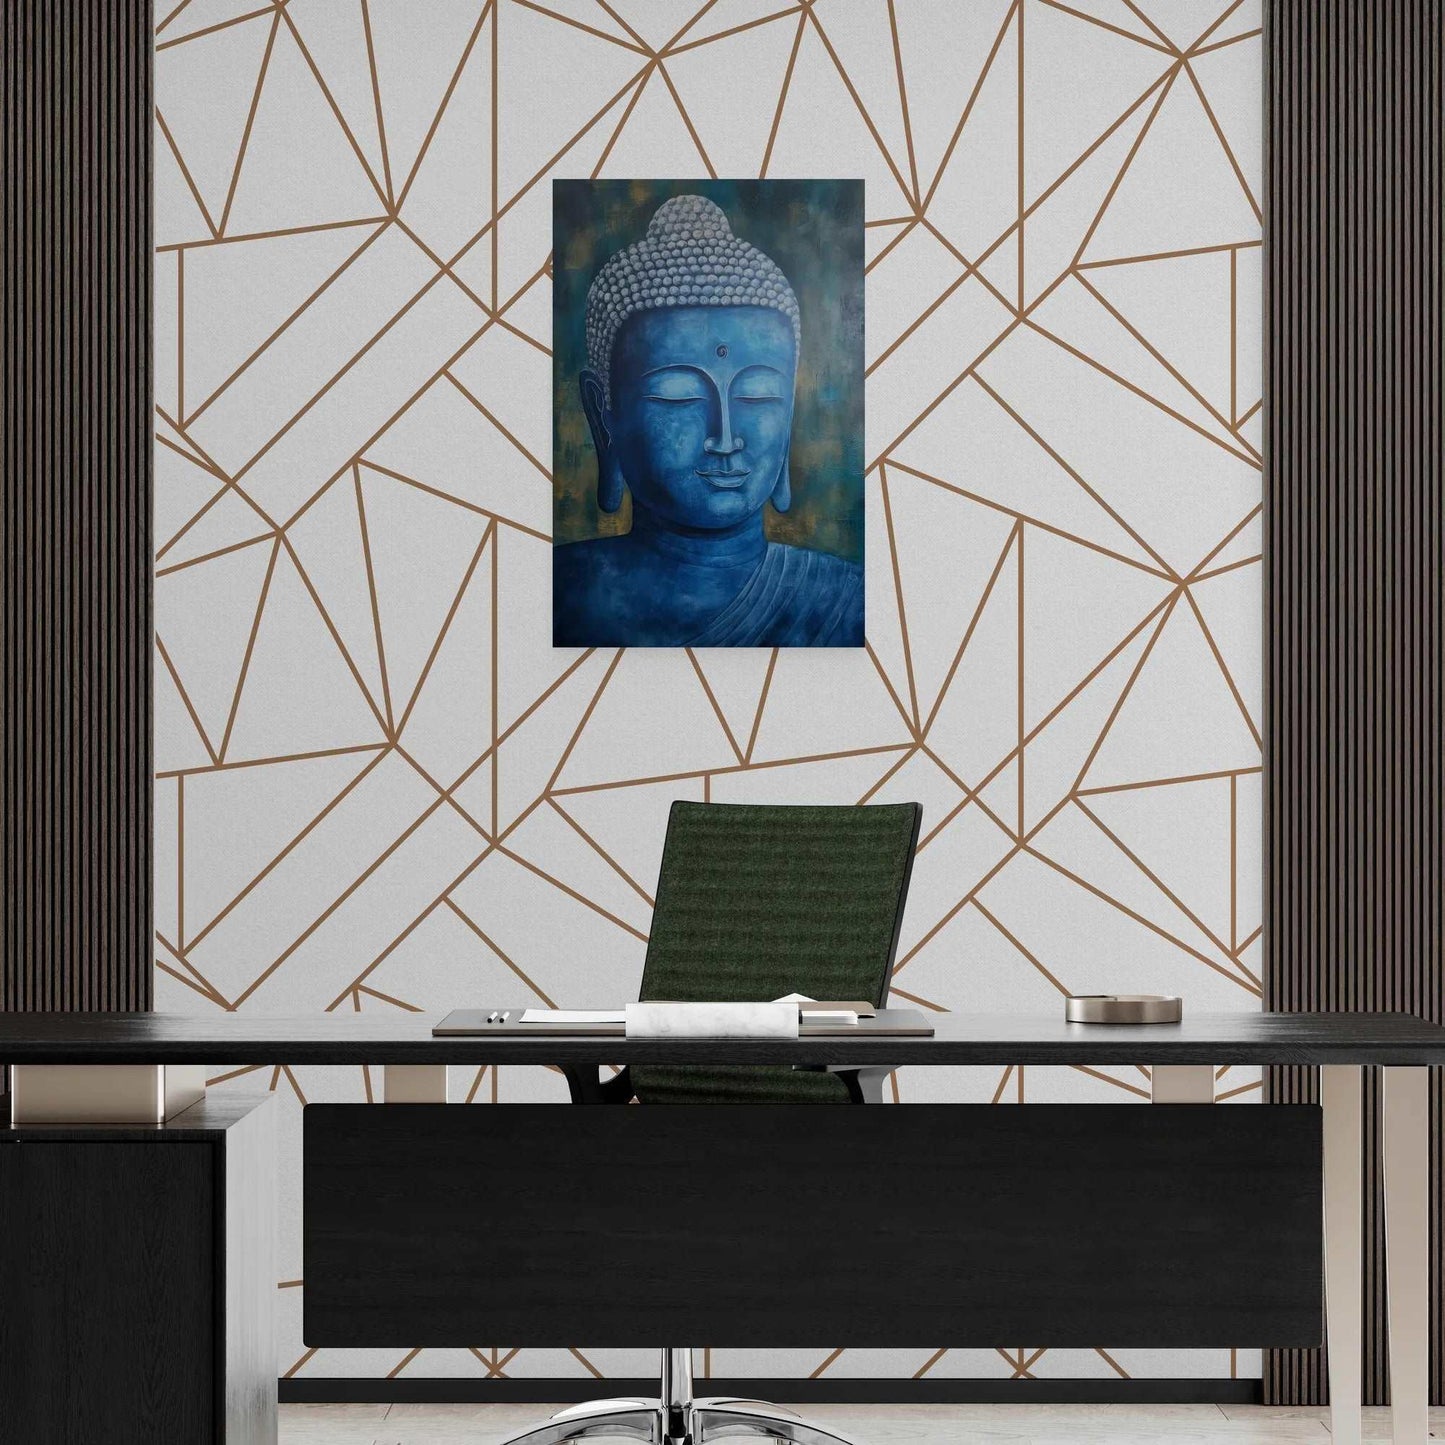 Modern office space with a geometric patterned wall, featuring a blue and gold Buddha painting that brings a touch of tranquility